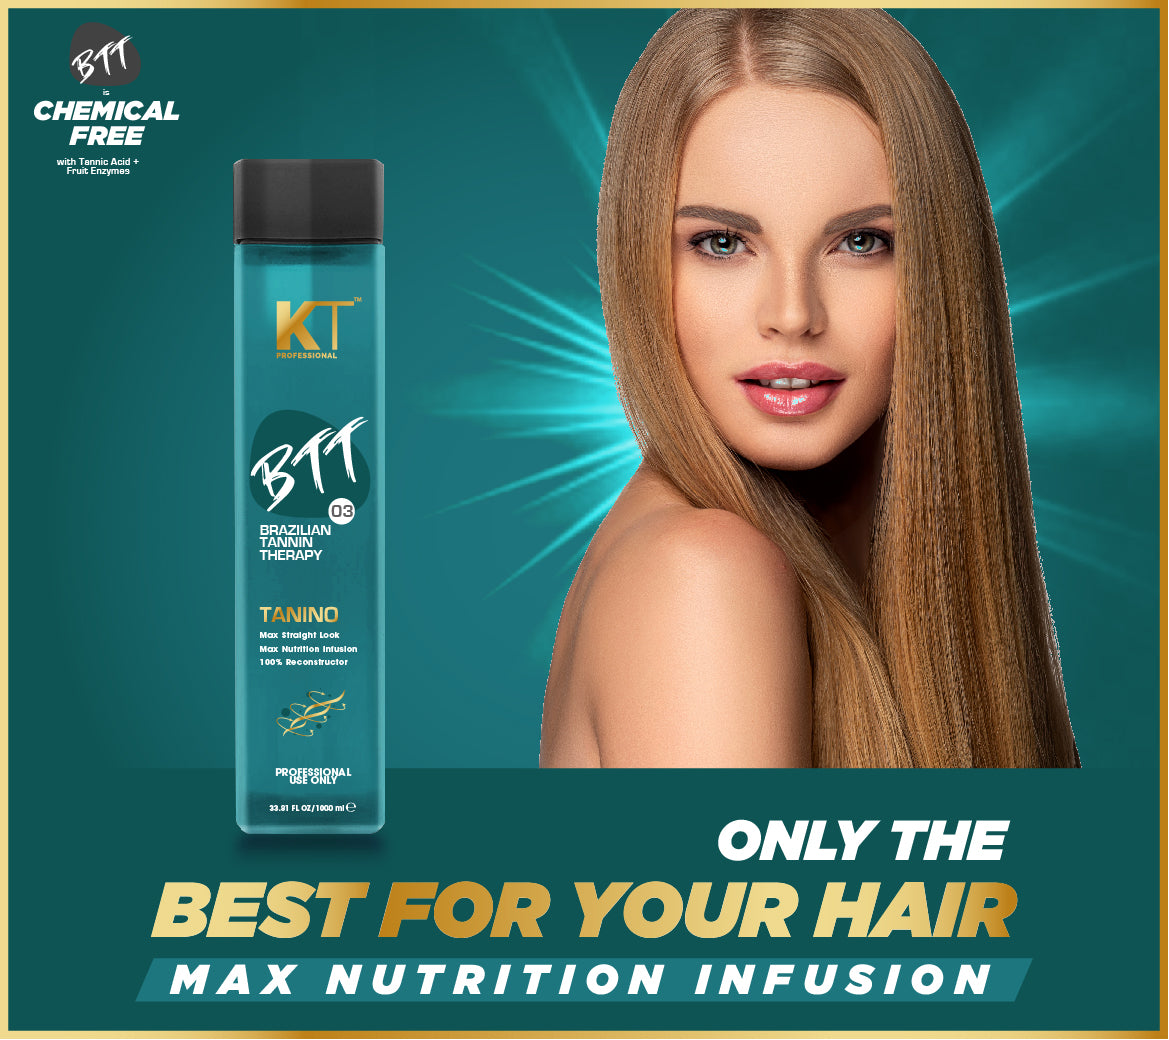 KT BTT Tanino 3  with Max Nutrition Infusion for your Hair - Training Video